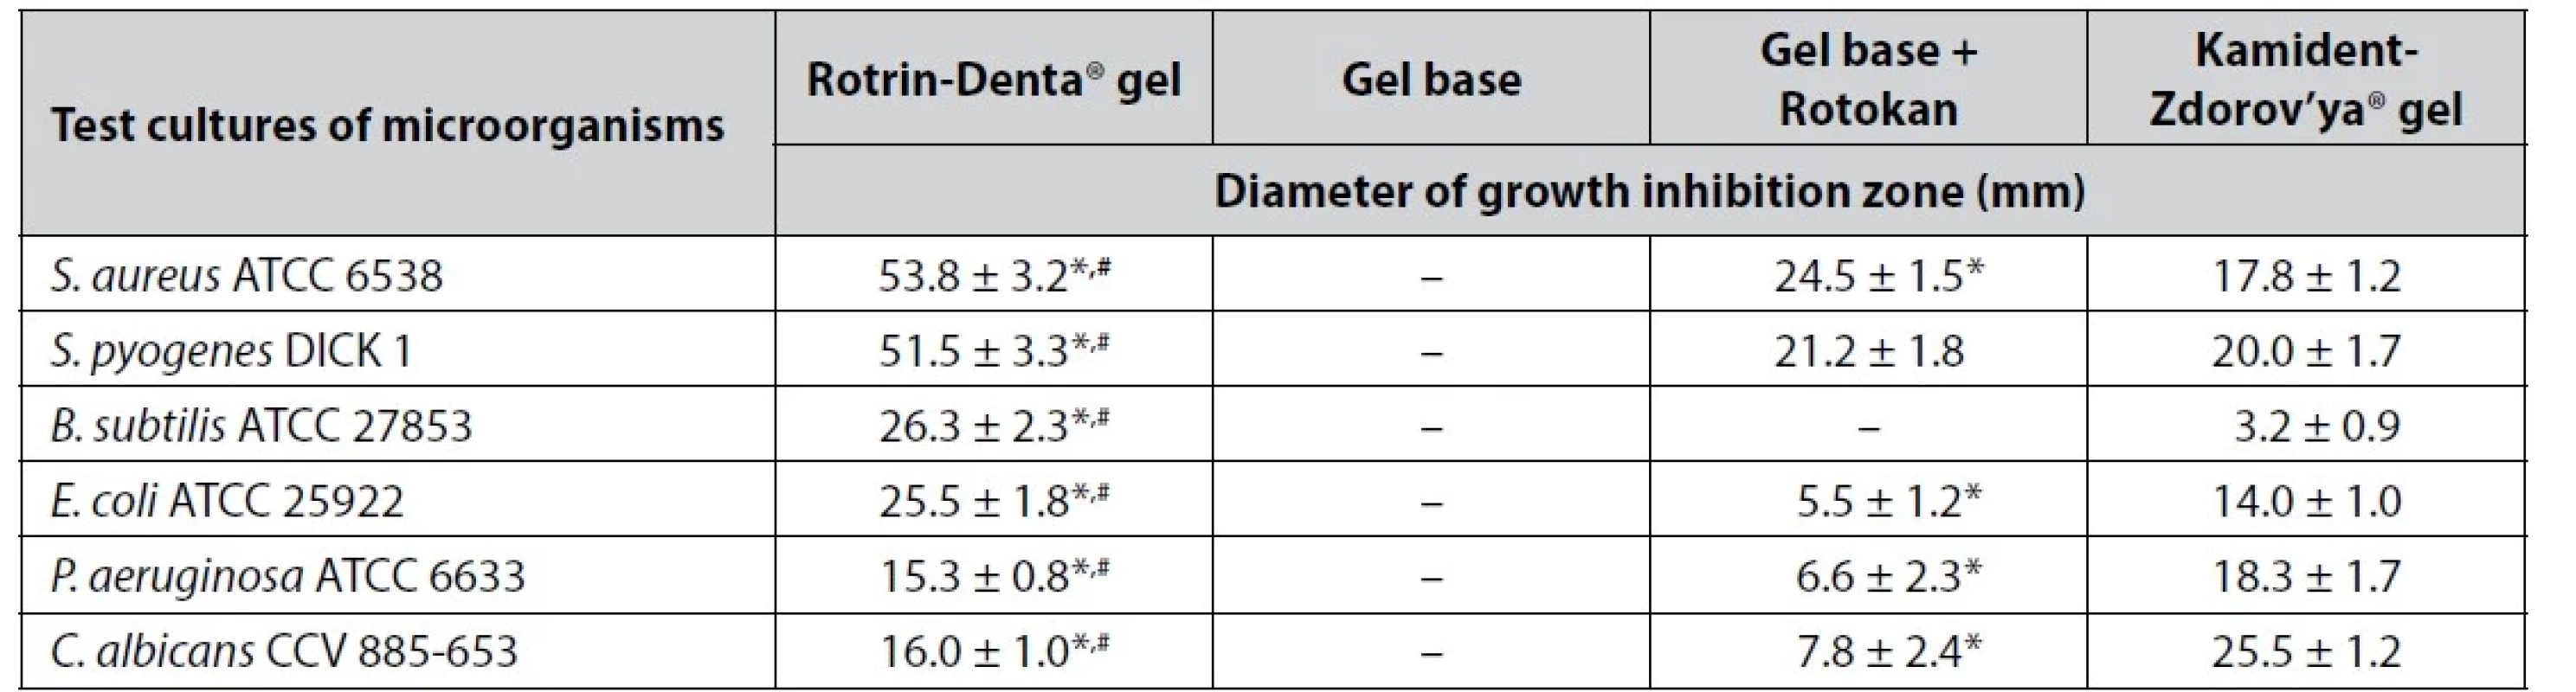 Zones of growth inhibition of test cultures of microorganisms etalon strains with Rotrin-Denta® gel and its ingredients, M
± m (n = 6)